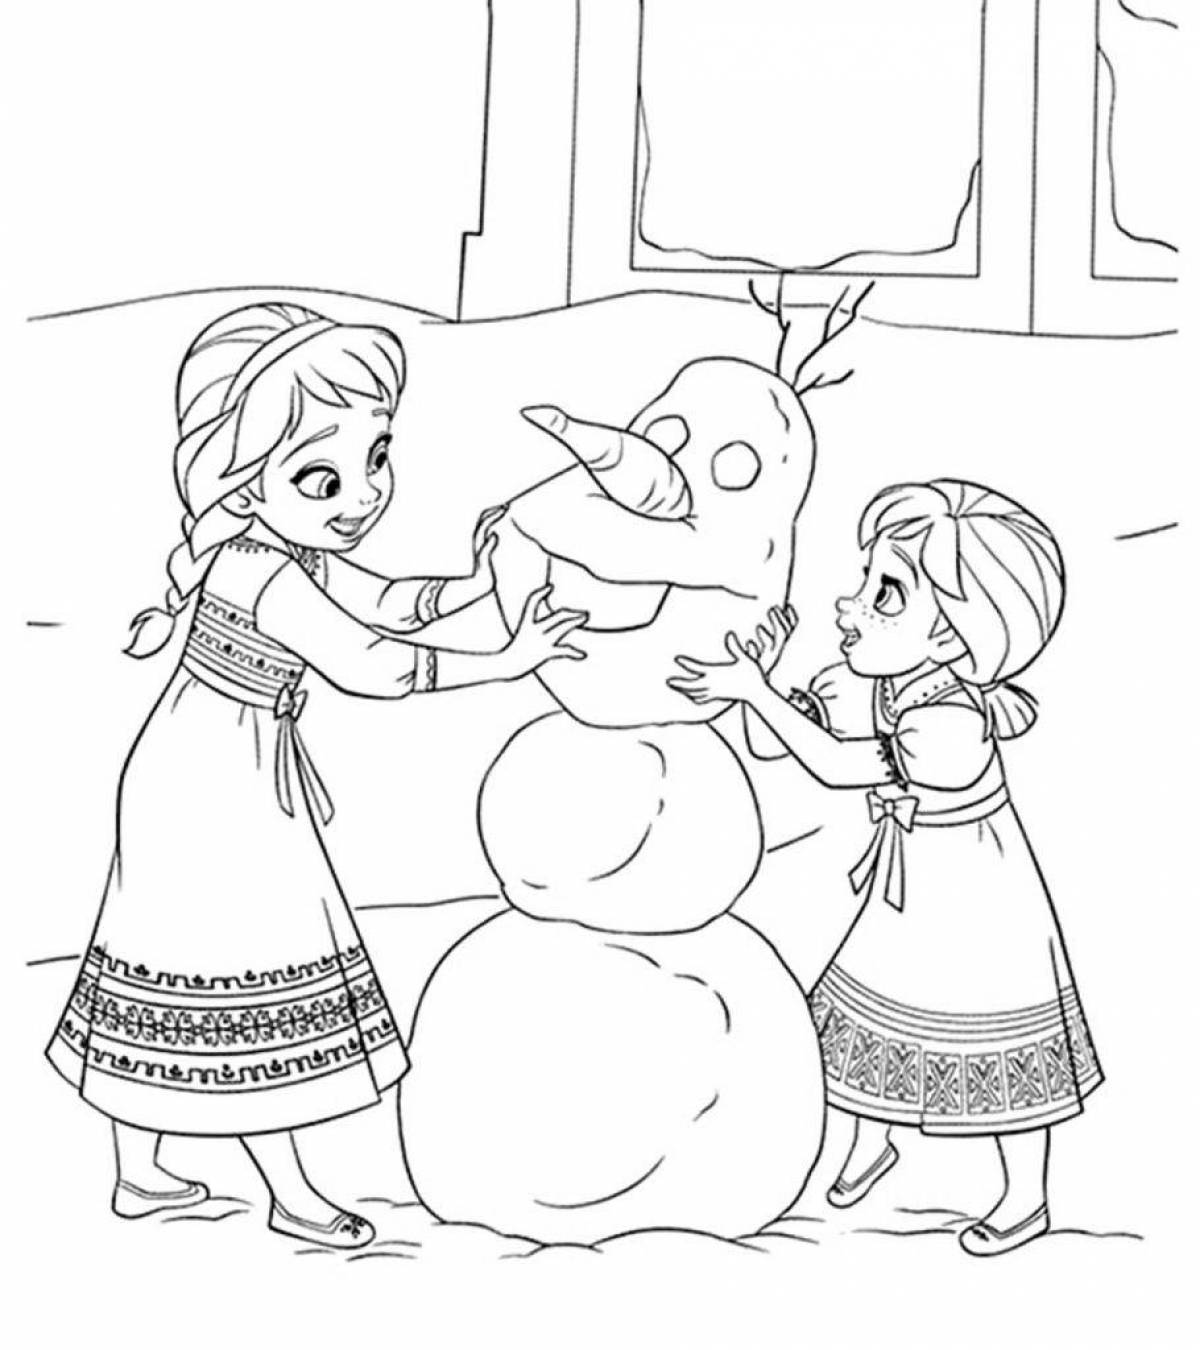 Exciting elsa and anna coloring book for kids